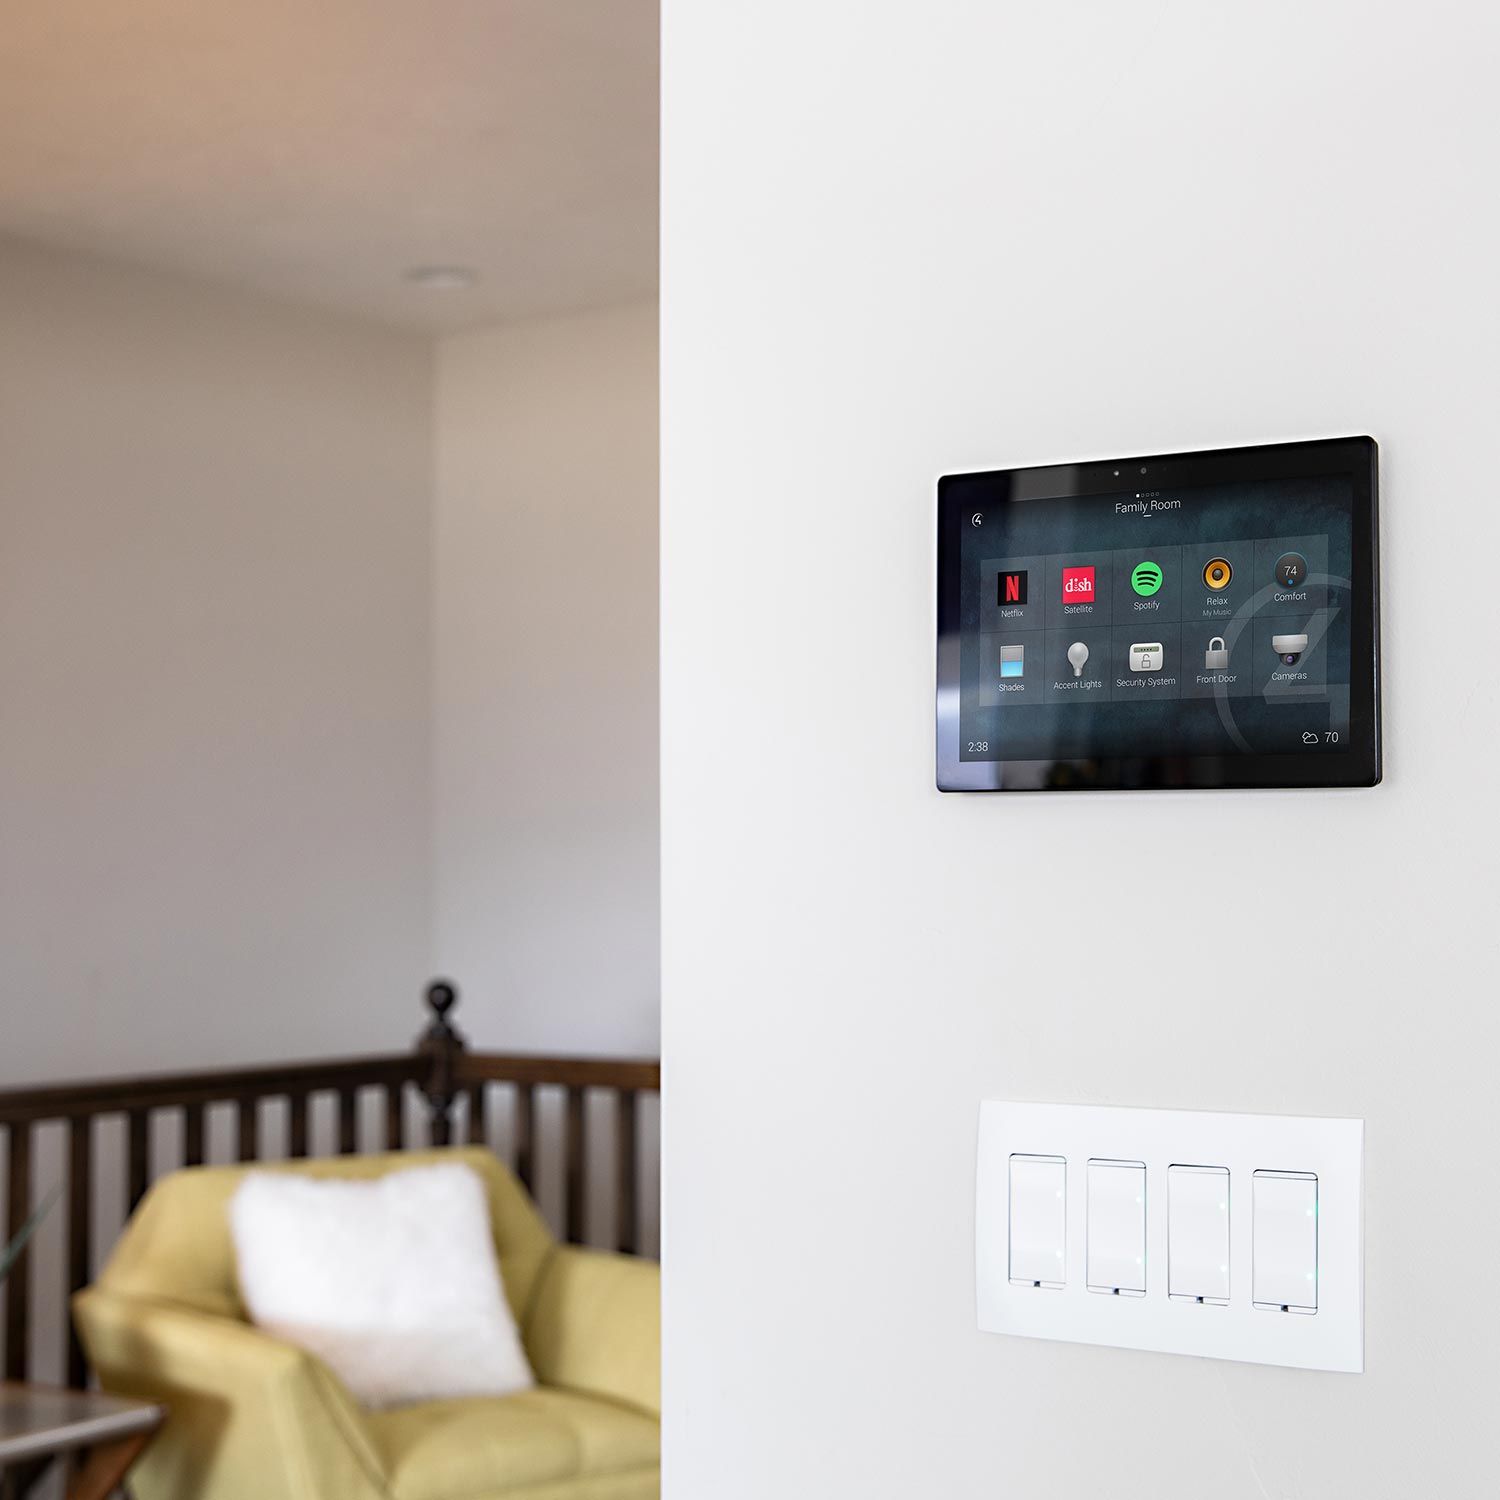 Control4 Smart Home Control ipad in a wall